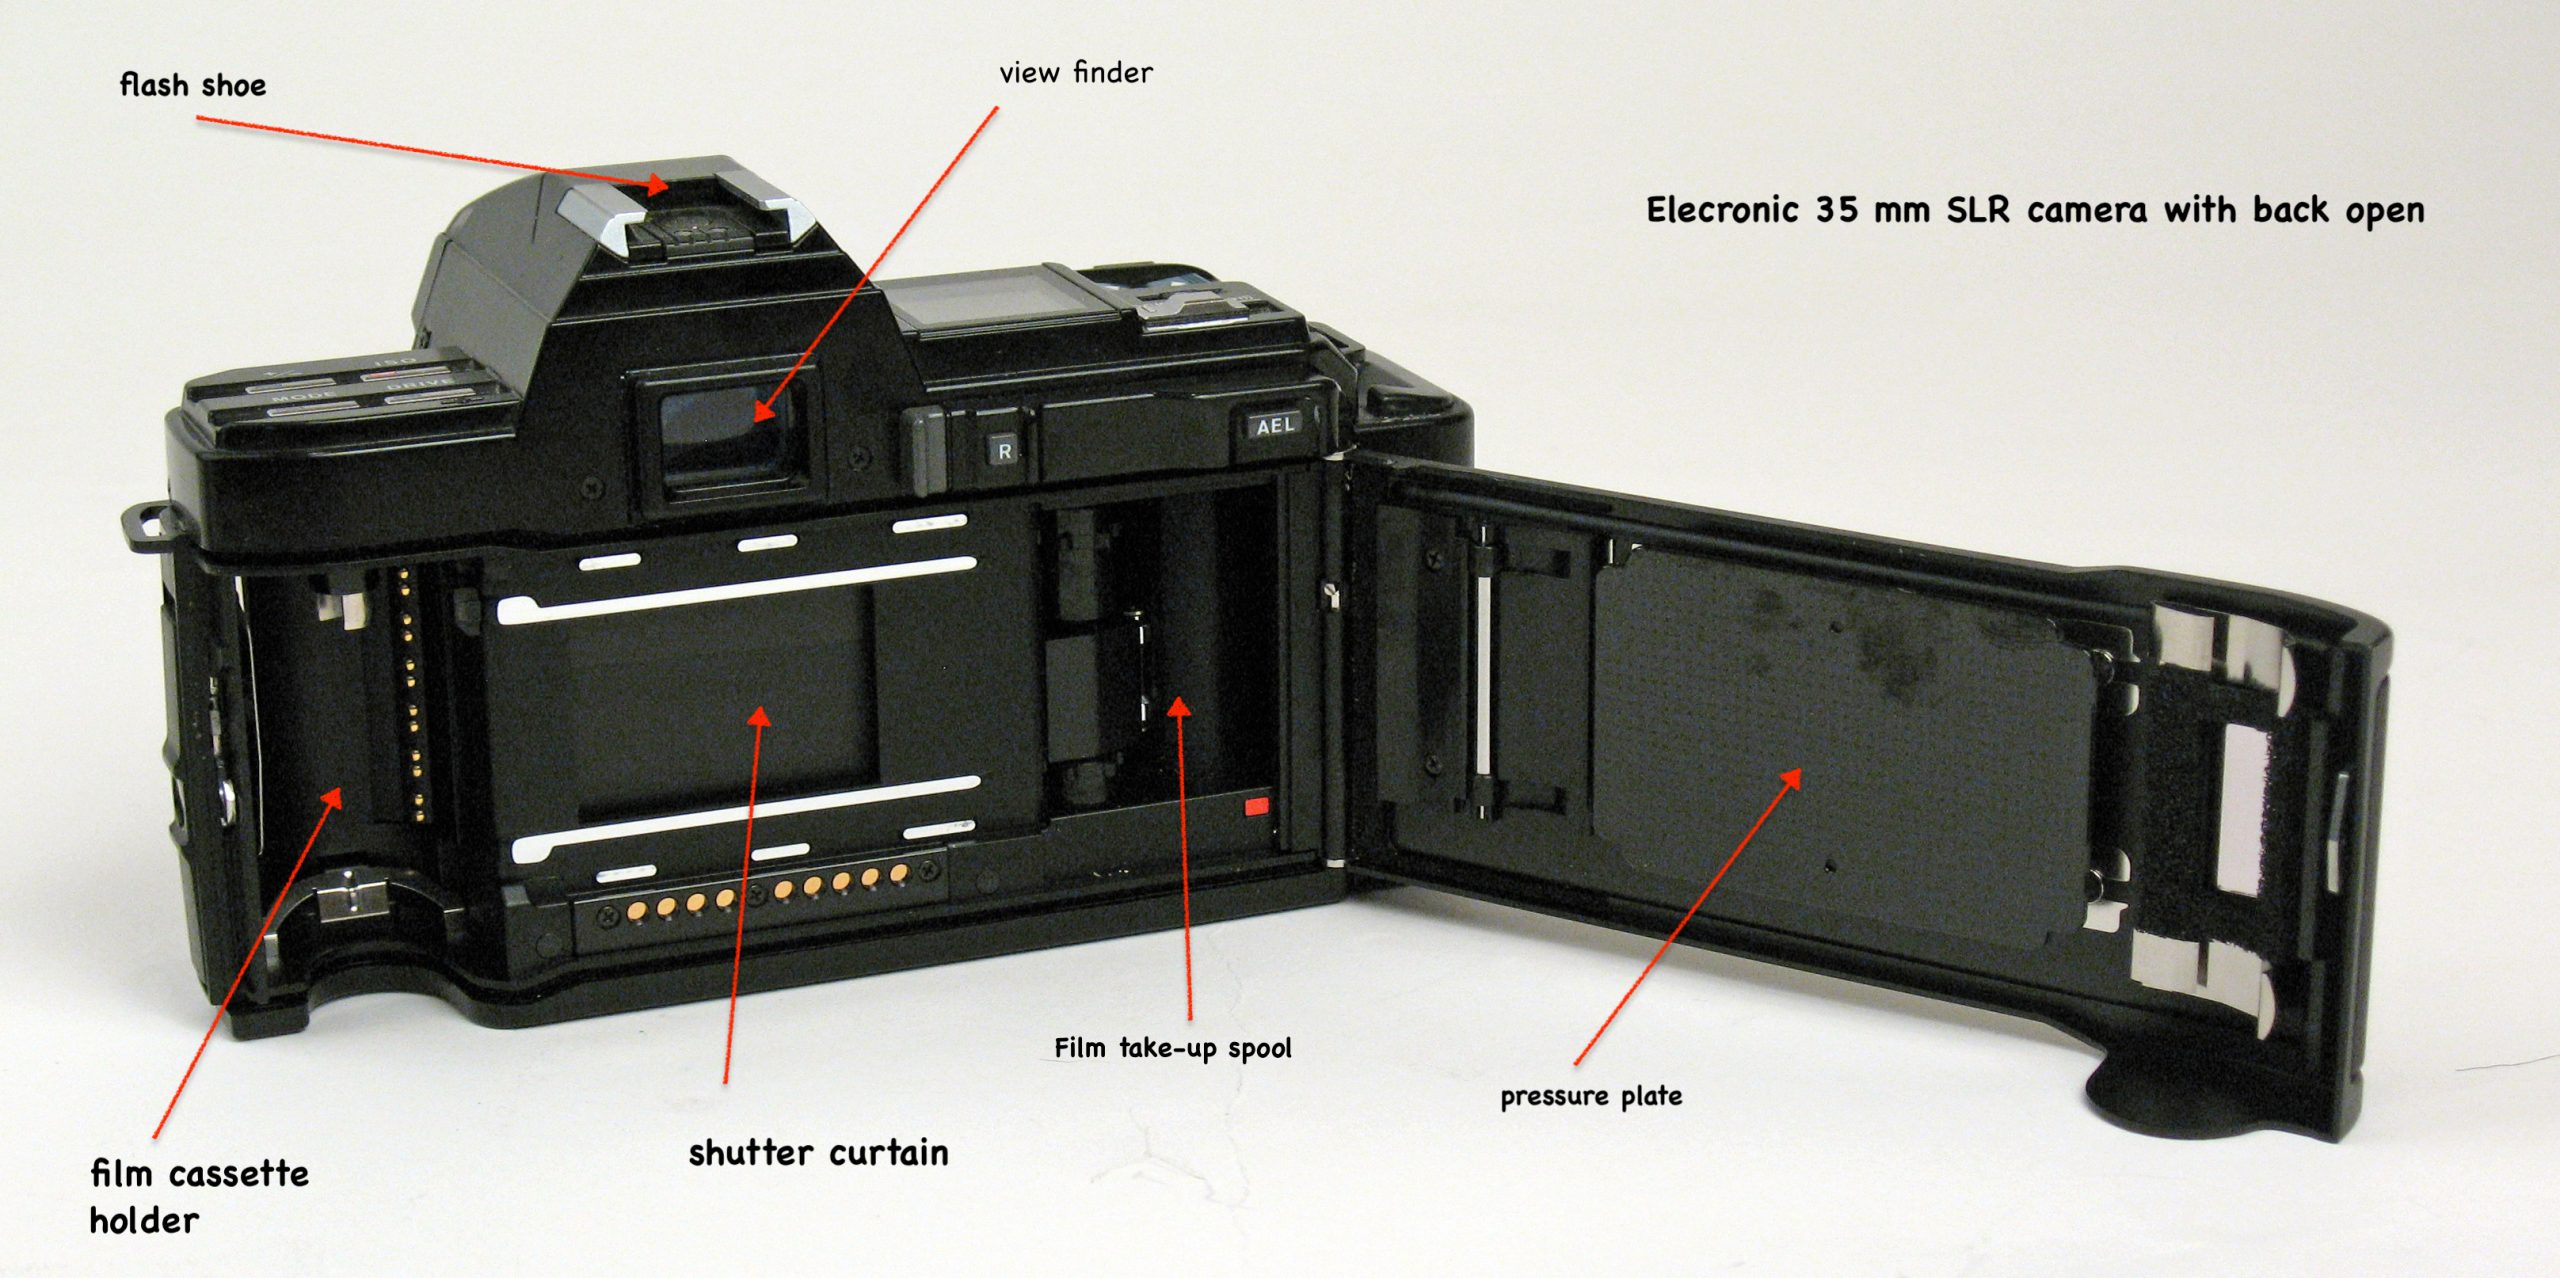 electronic SLR 35mm camera with back open